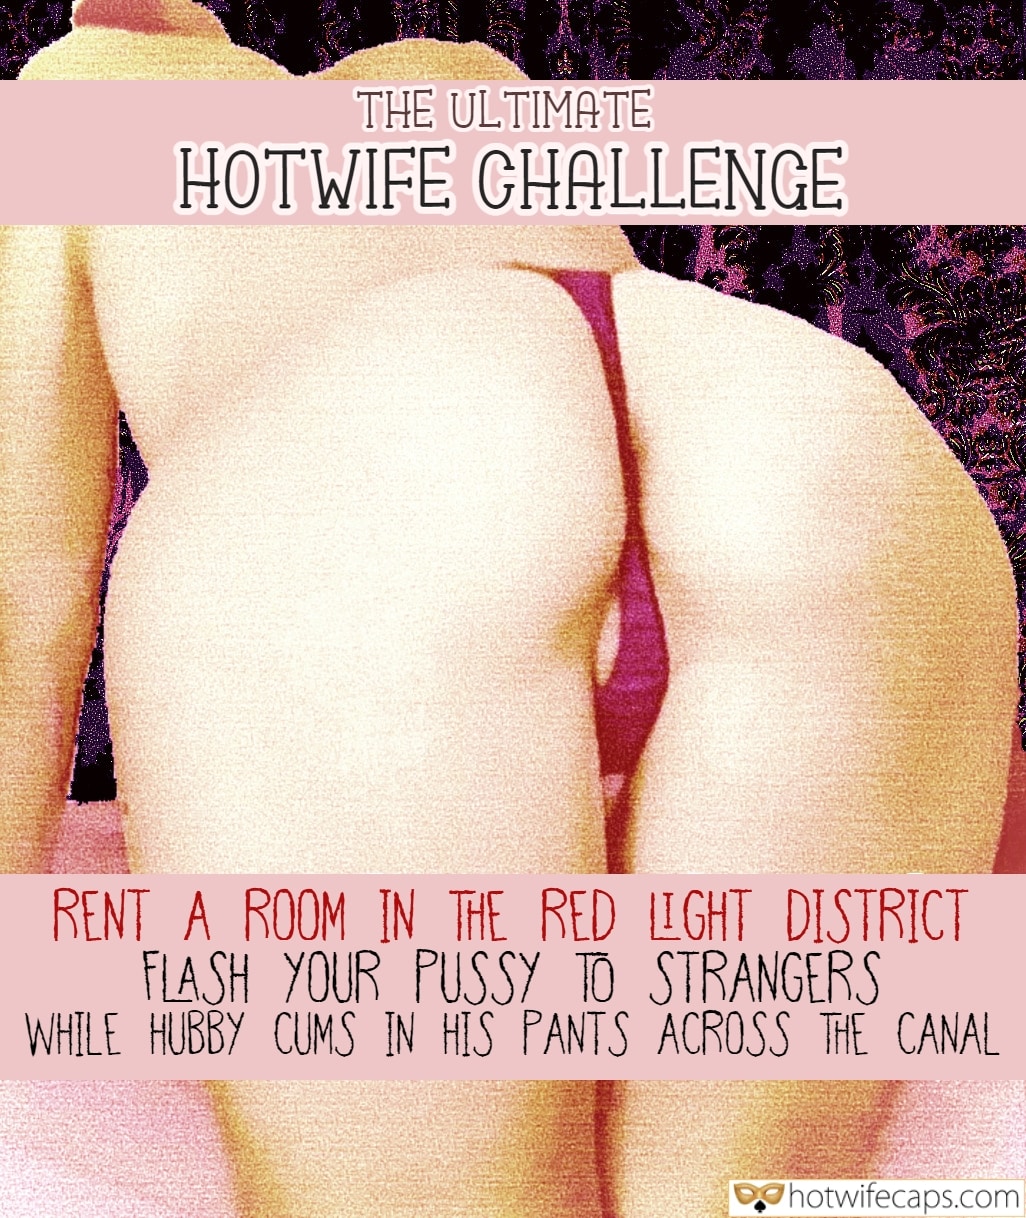 Hotwife Challenge - Hotwife Dares - Cuckold Captions picture